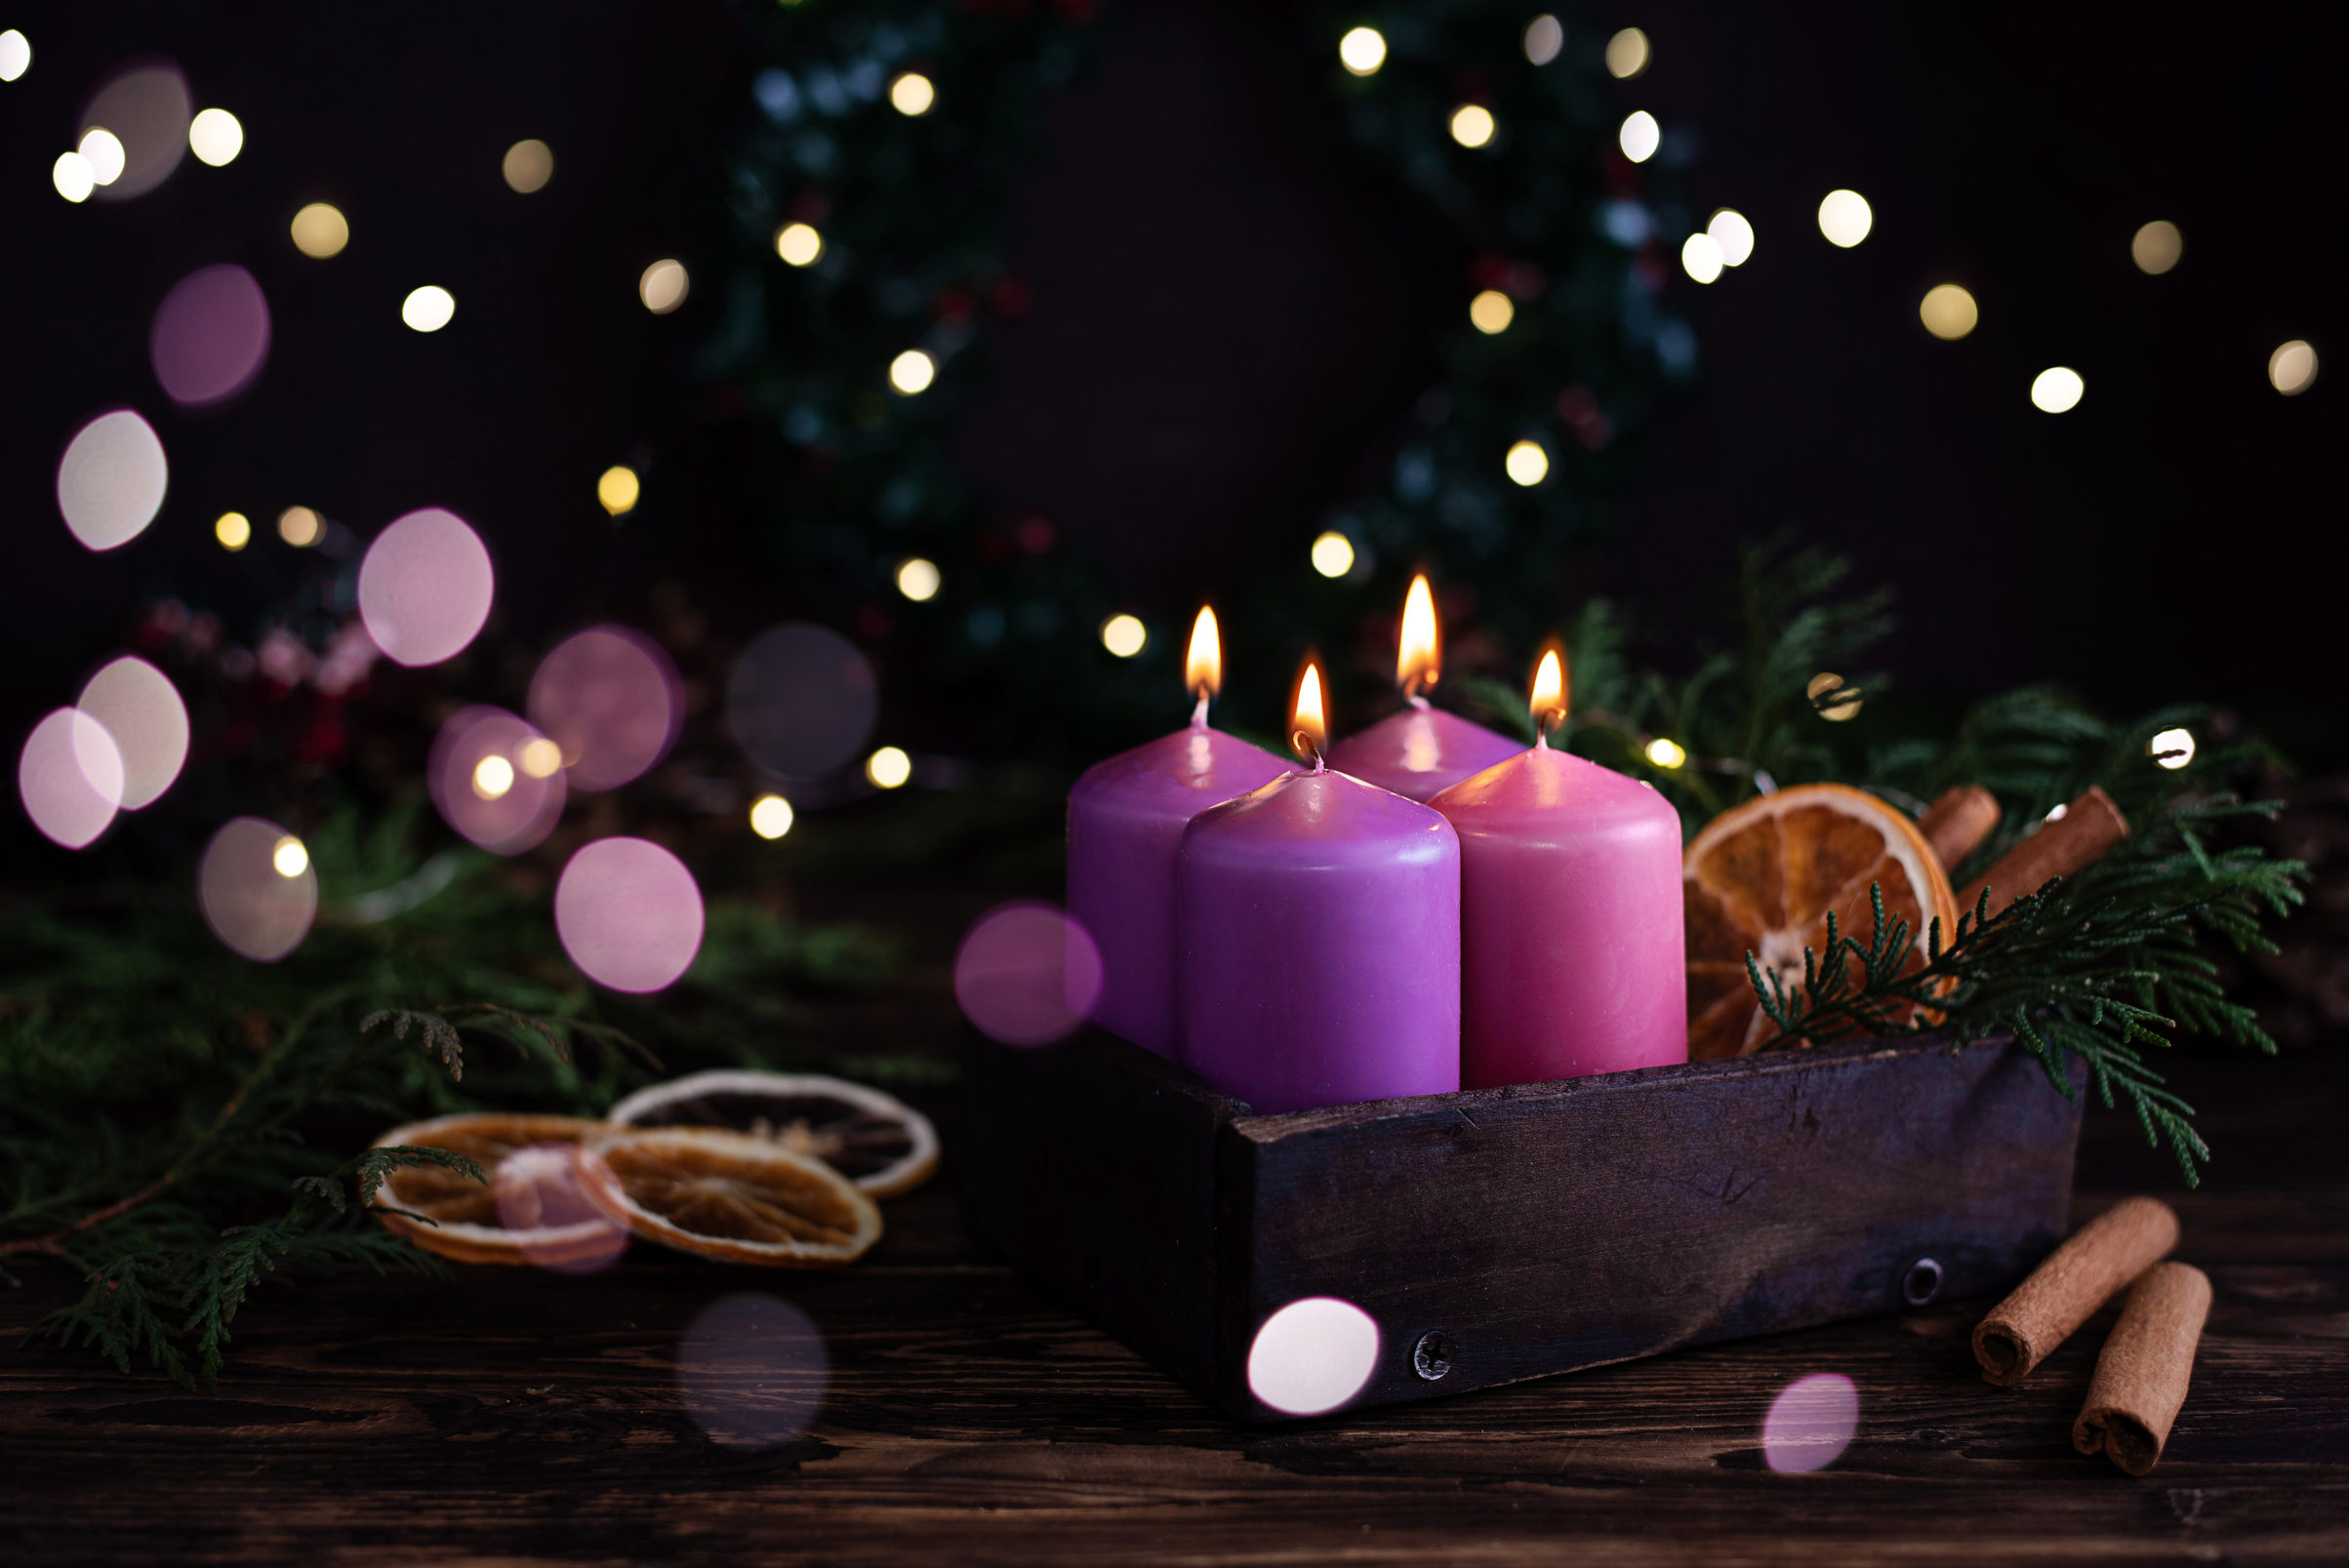 Four purple burning advent candles, Christmas eve.